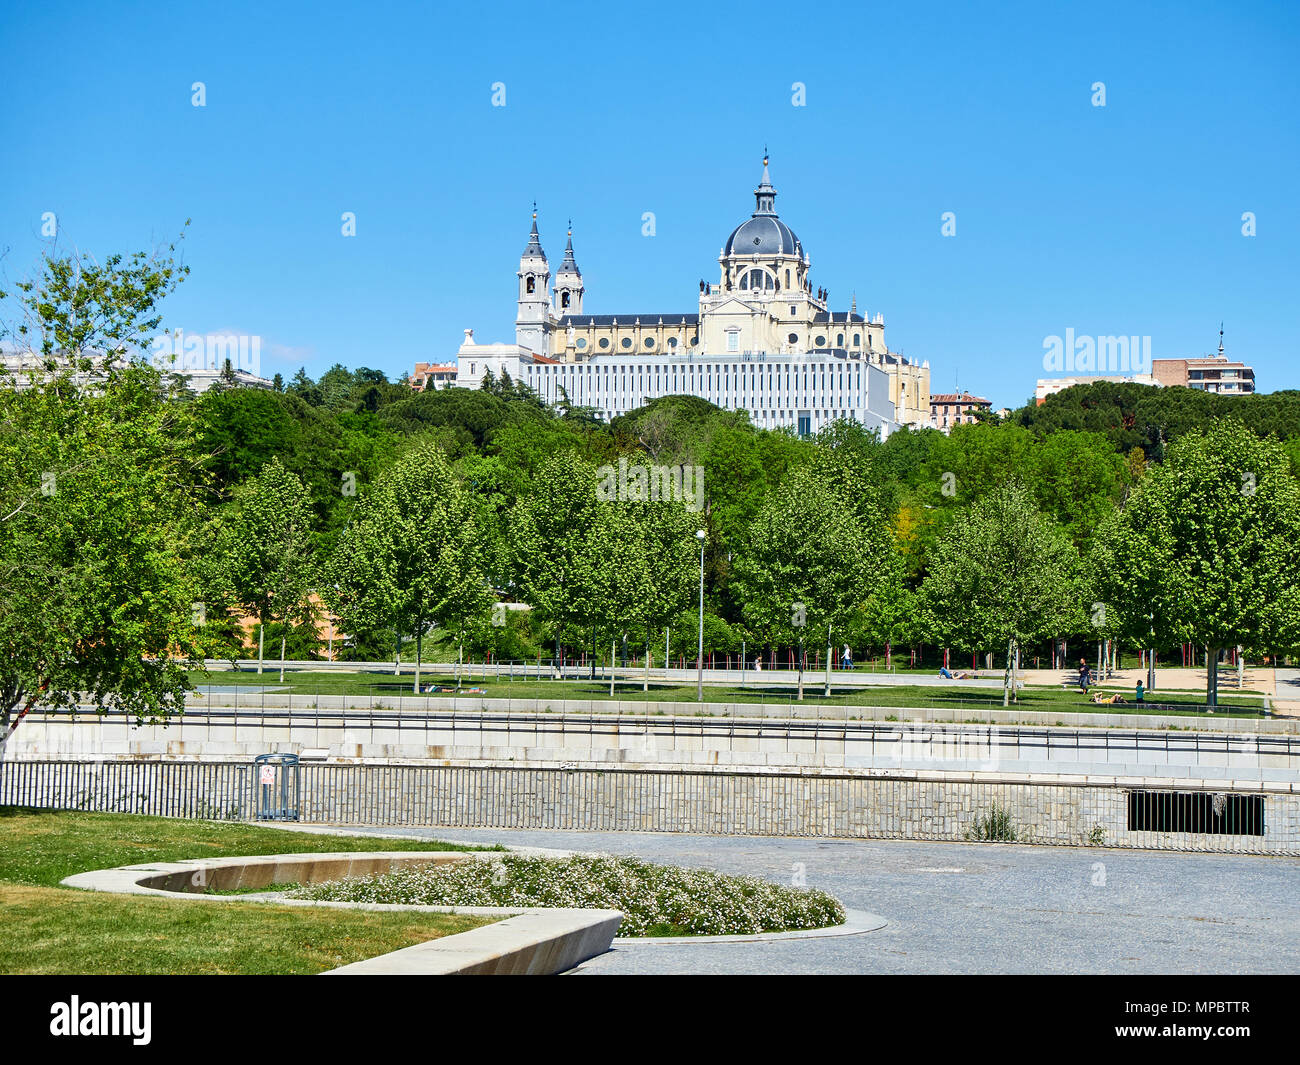 People enjoying a spring day in the Green spaces of Madrid Rio with the Almudena Cathedral in background. Madrid, Spain. Stock Photo